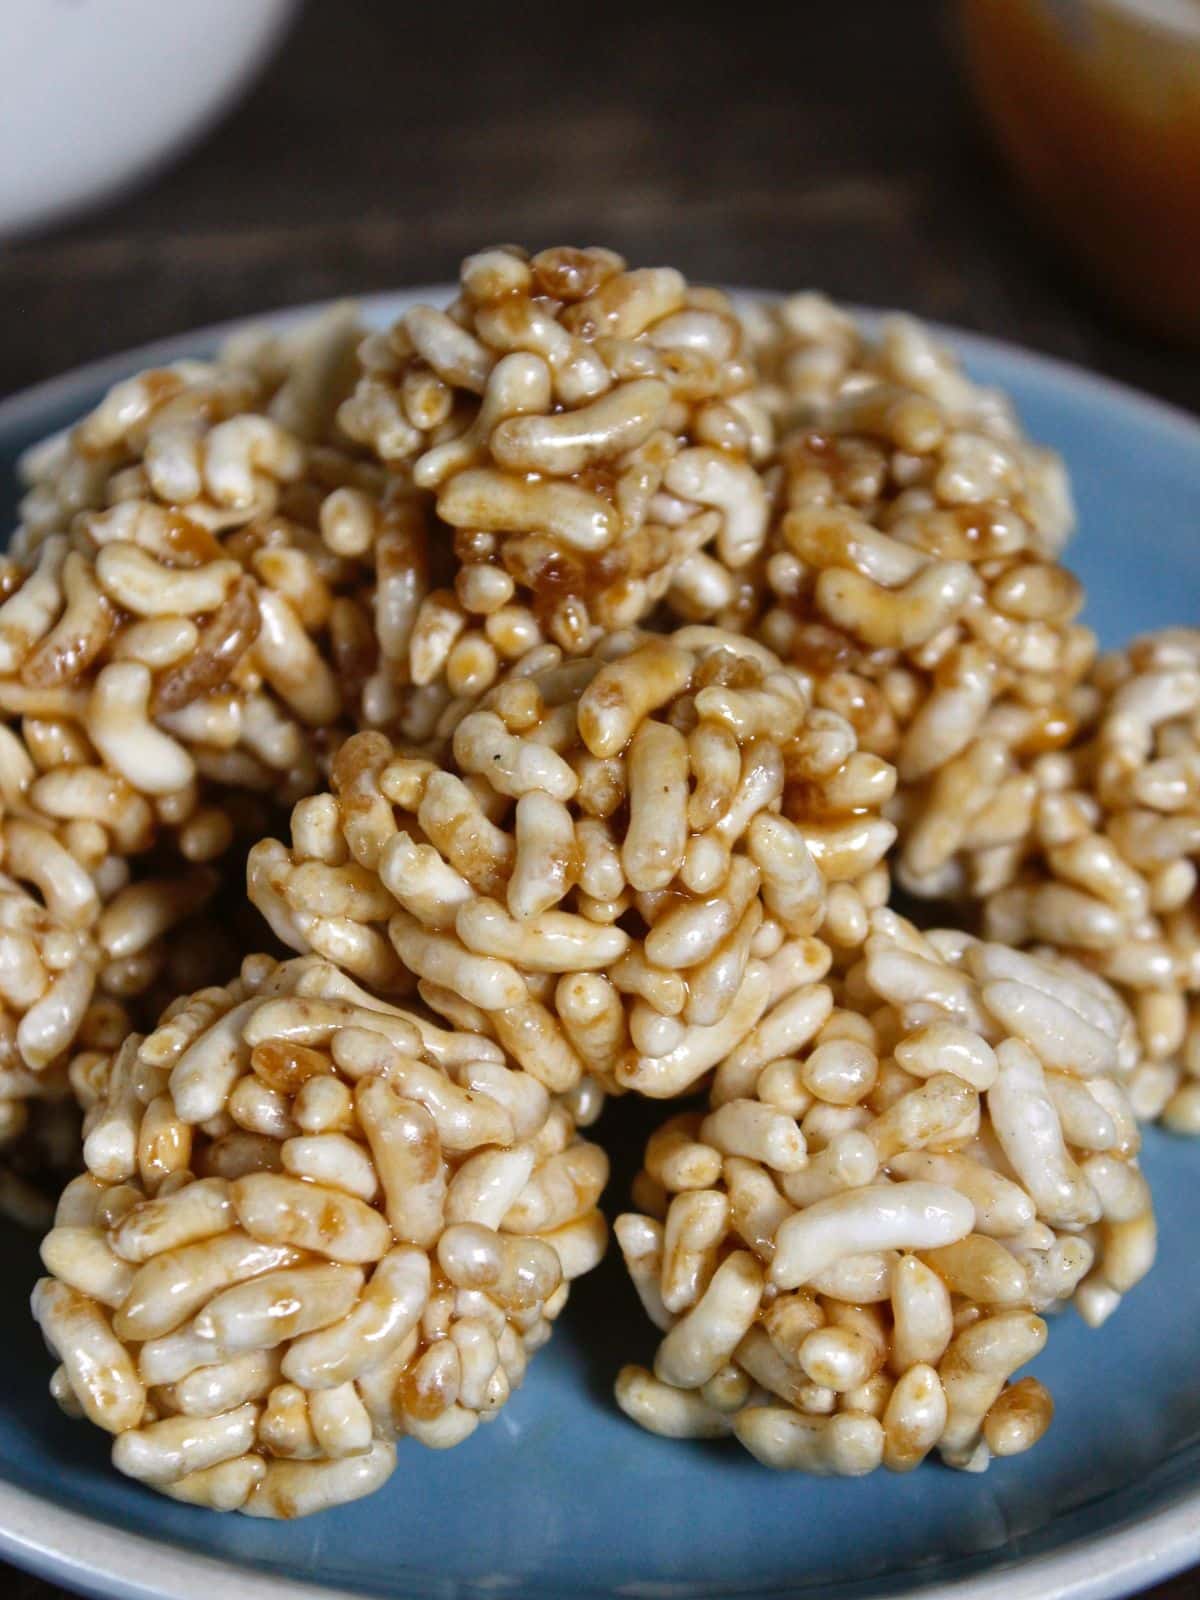 zoom in image of caramel puffed rice balls